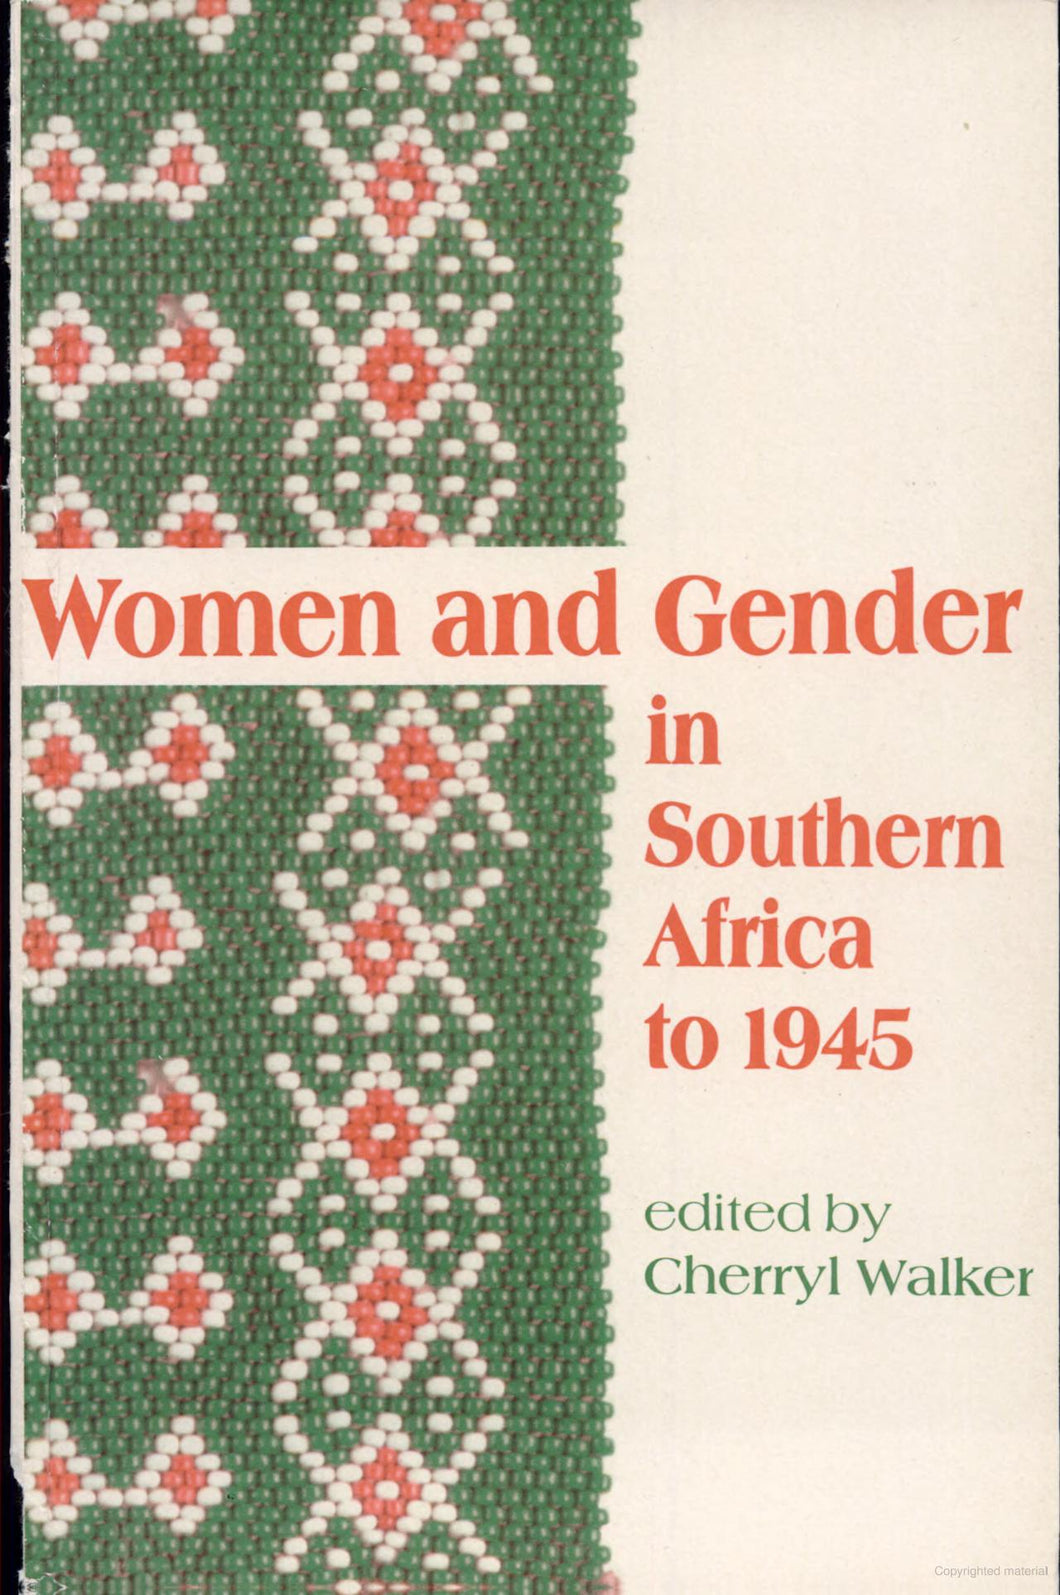 WOMEN AND GENDER in Southern Africa to 1945